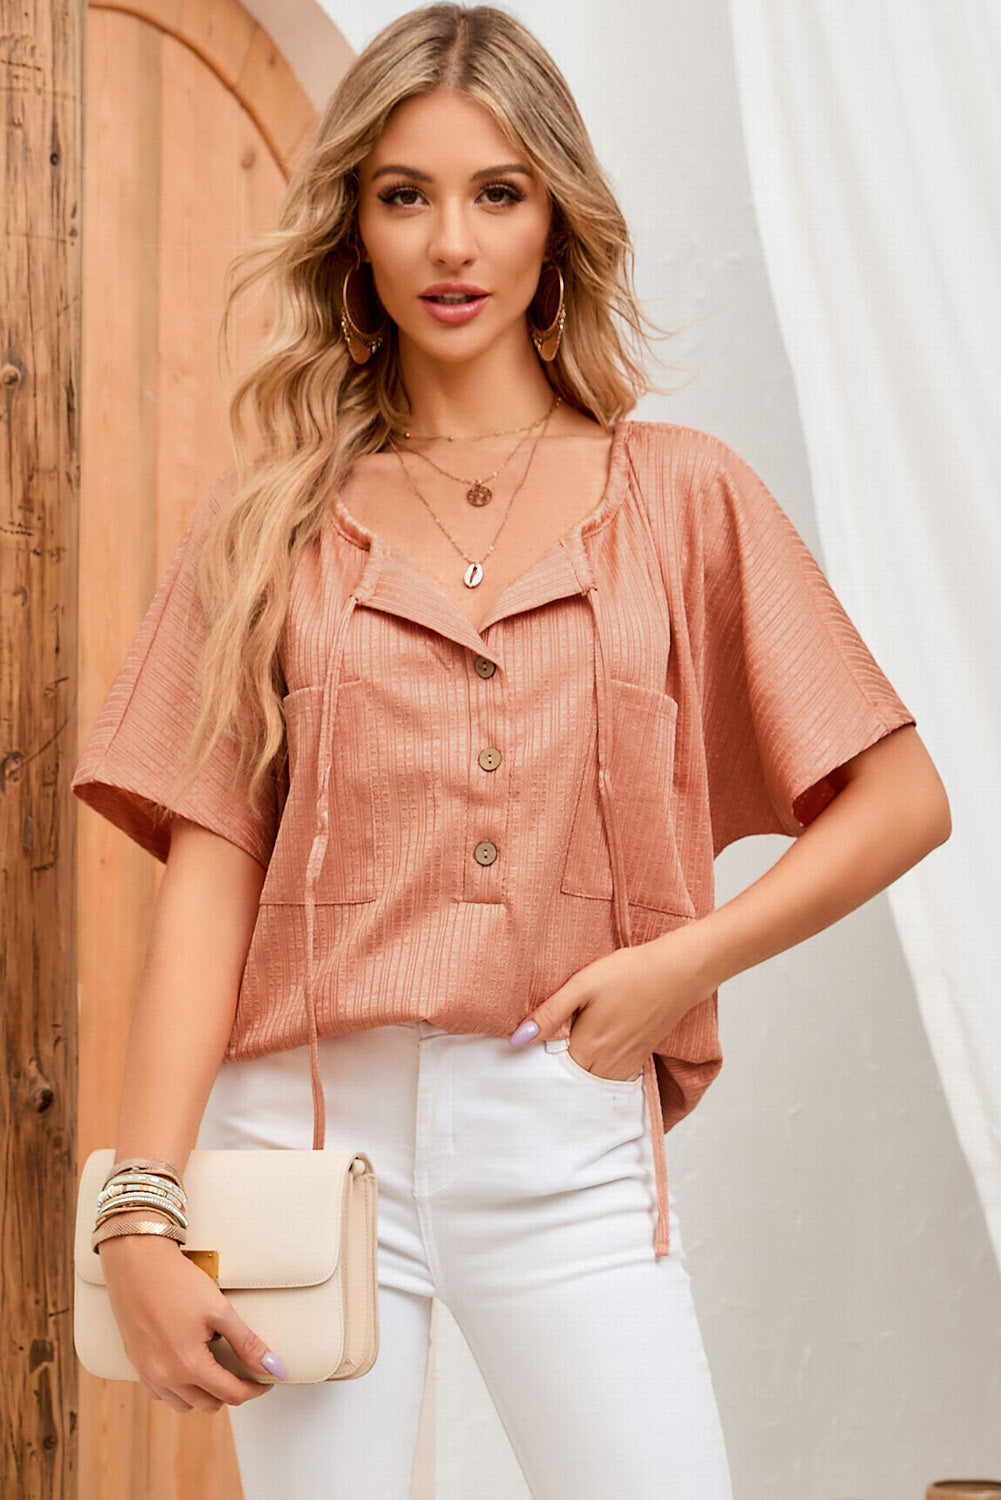 Tied Round Neck Buttoned Top - Orange / S - Women’s Clothing & Accessories - Shirts & Tops - 1 - 2024